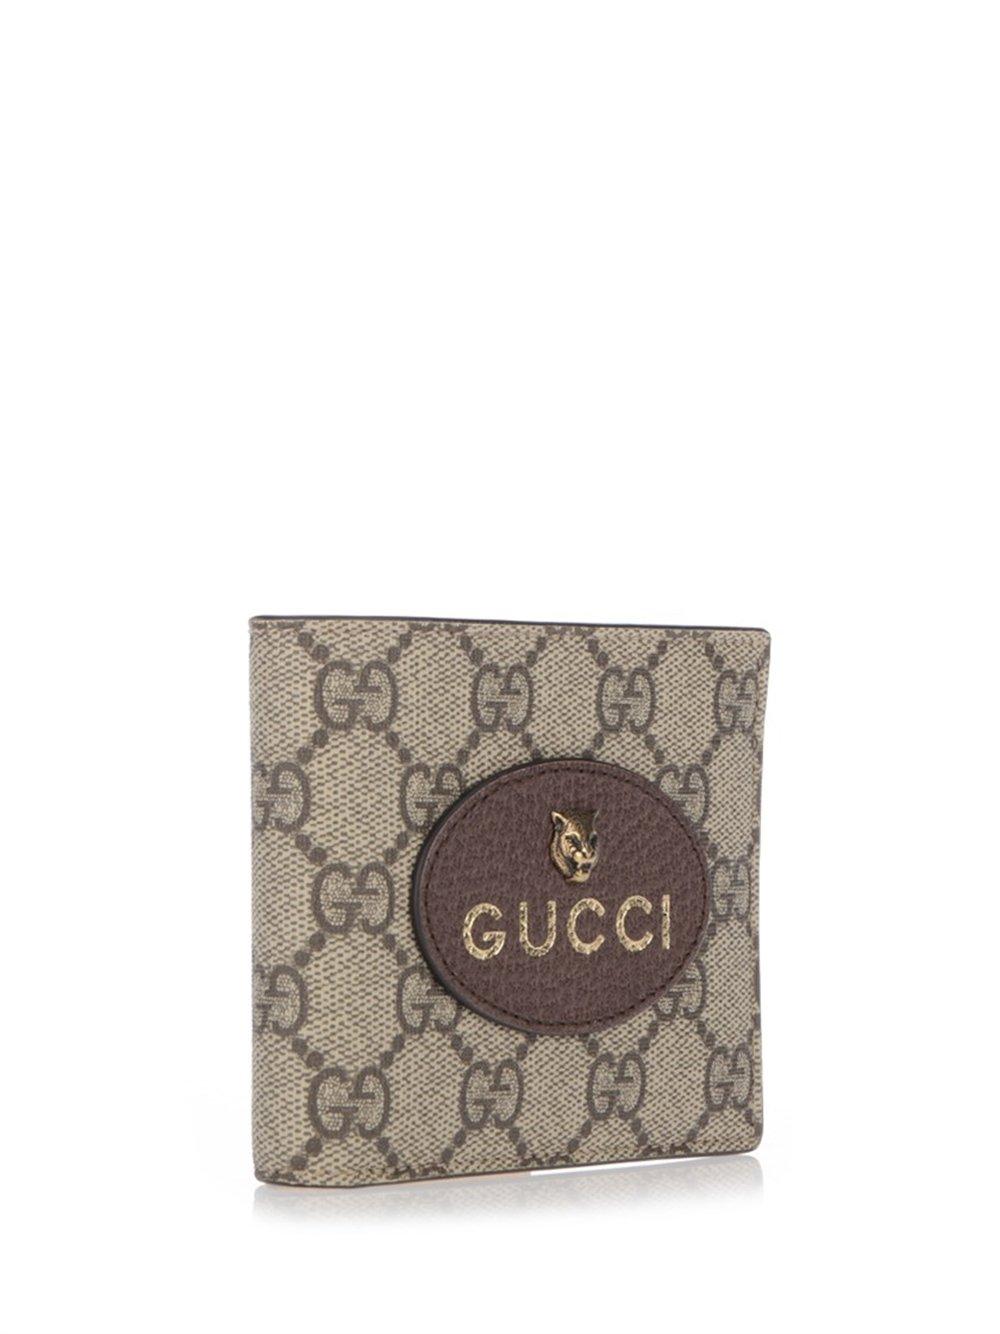 Gucci Leather Neo Vintage GG Supreme Wallet in Beige (Natural) for 